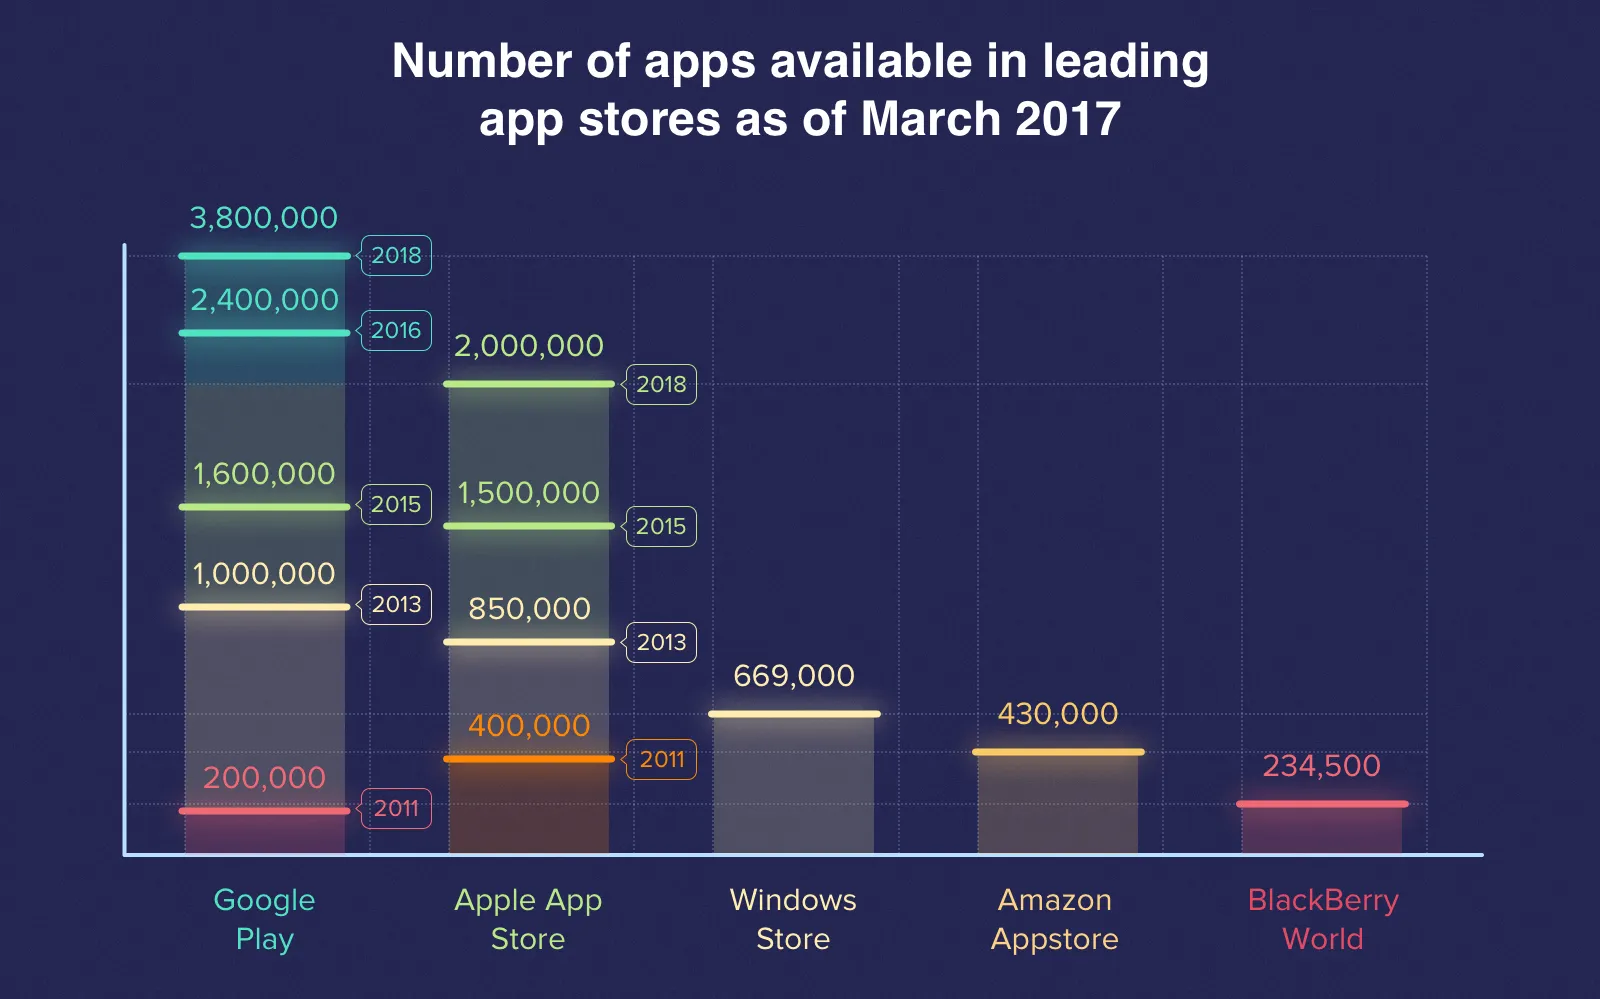 The biggest mobile app stores as of March 2017